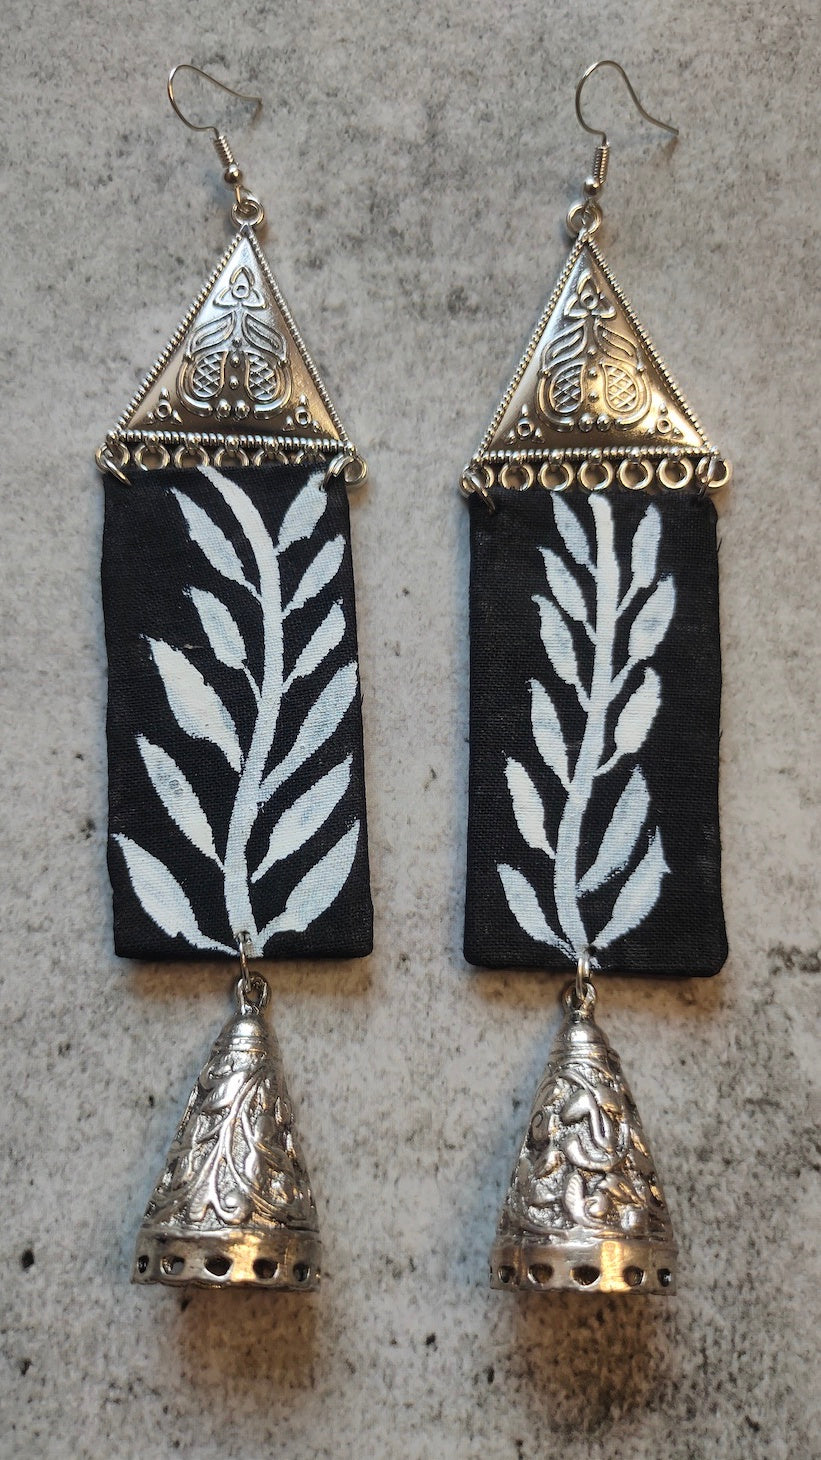 Hand-Painted Monochrome Long Fabric Earrings with Metal Danglers